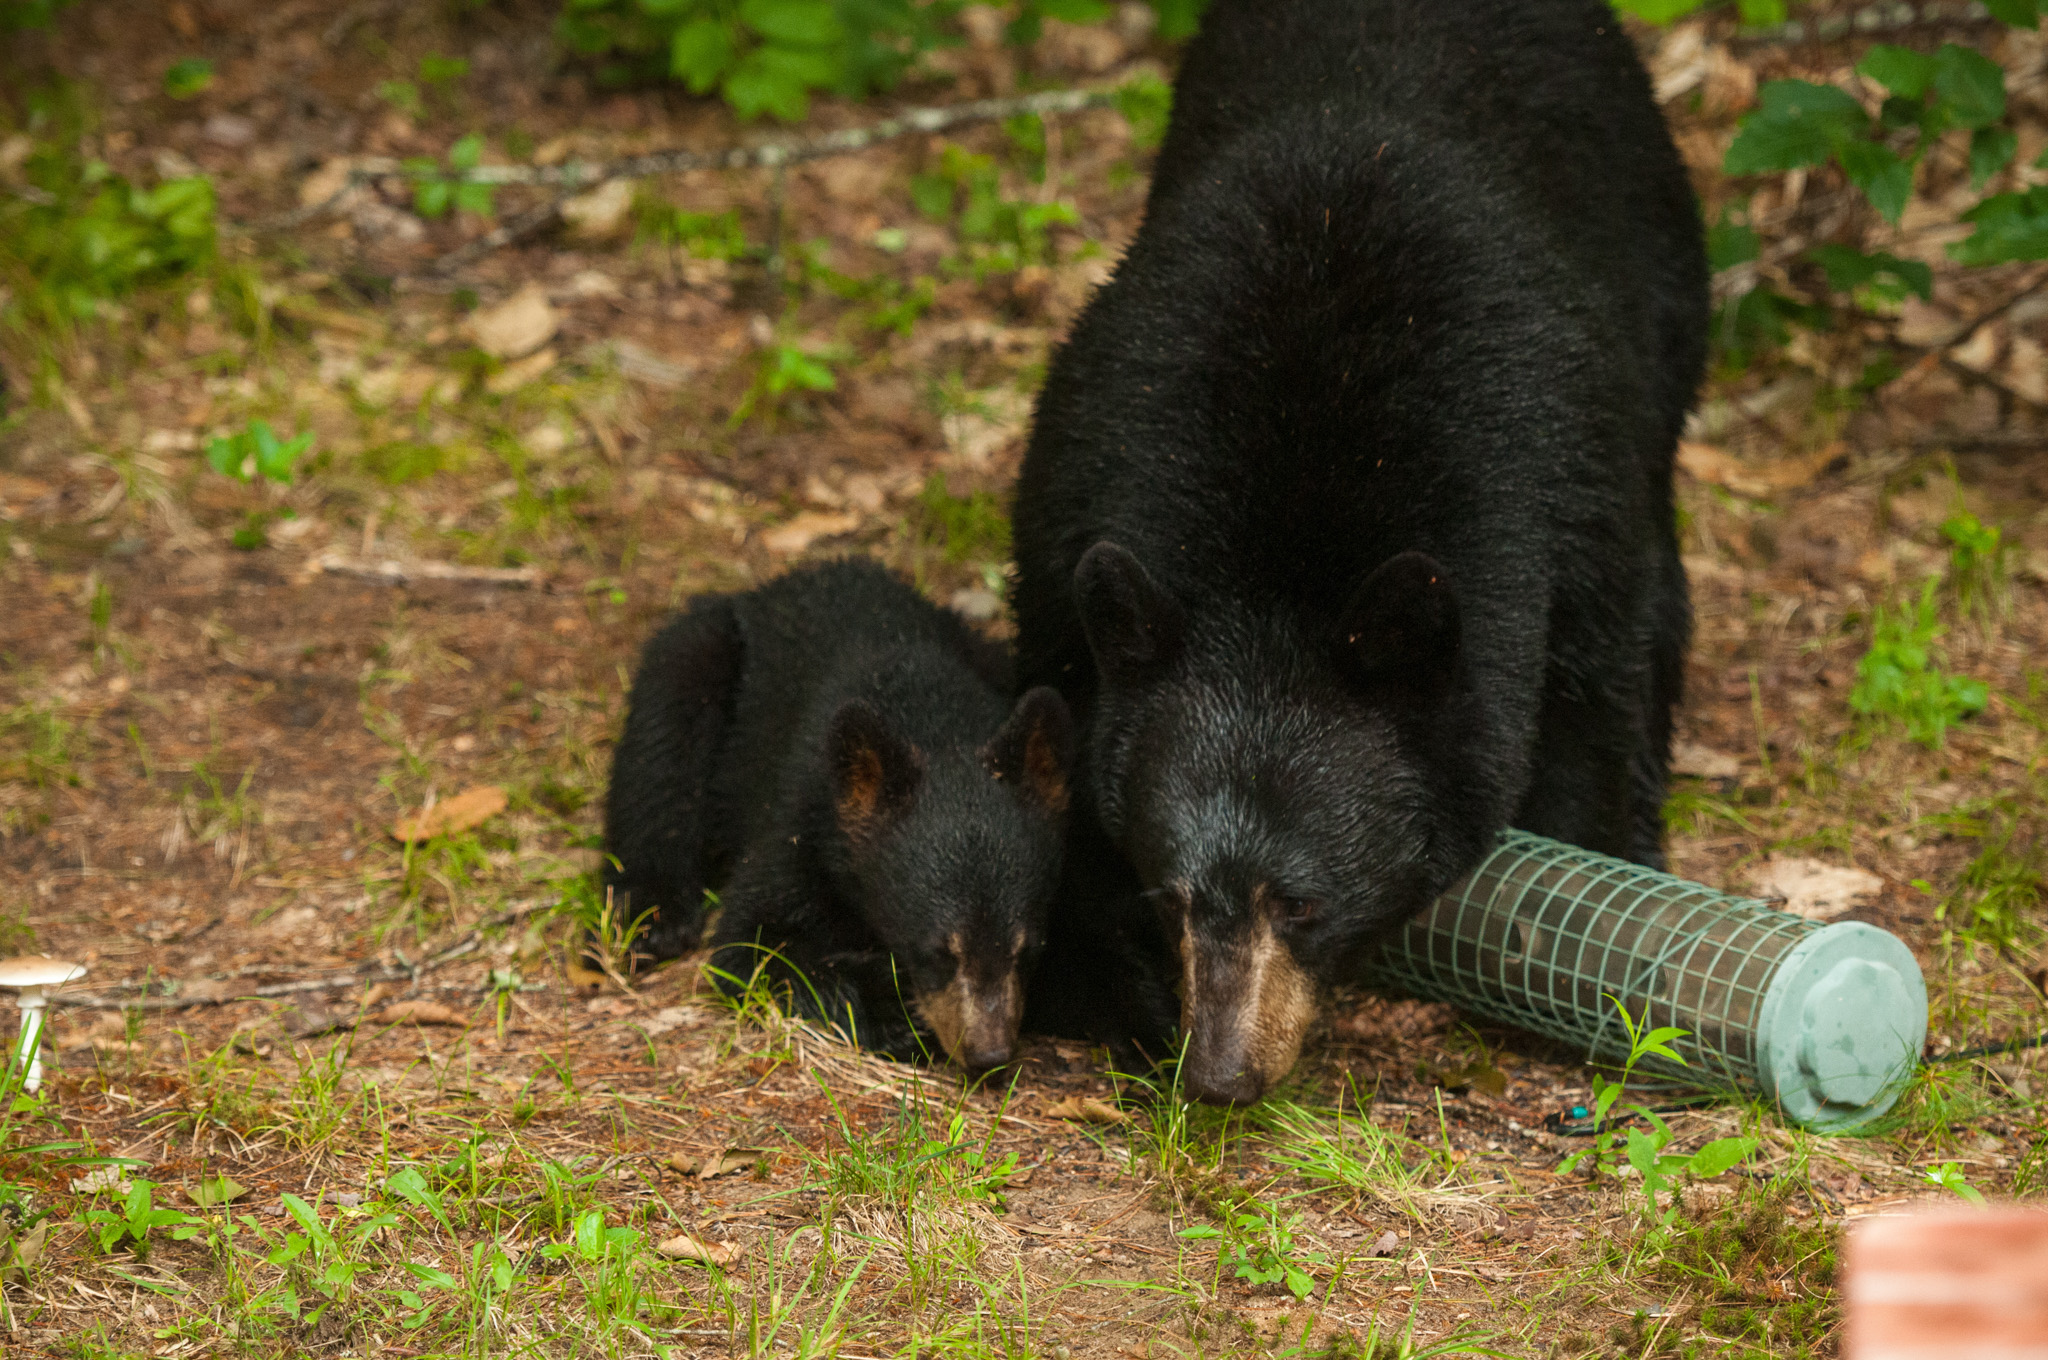 Two black bears eat from a knocked-over bird feeder.